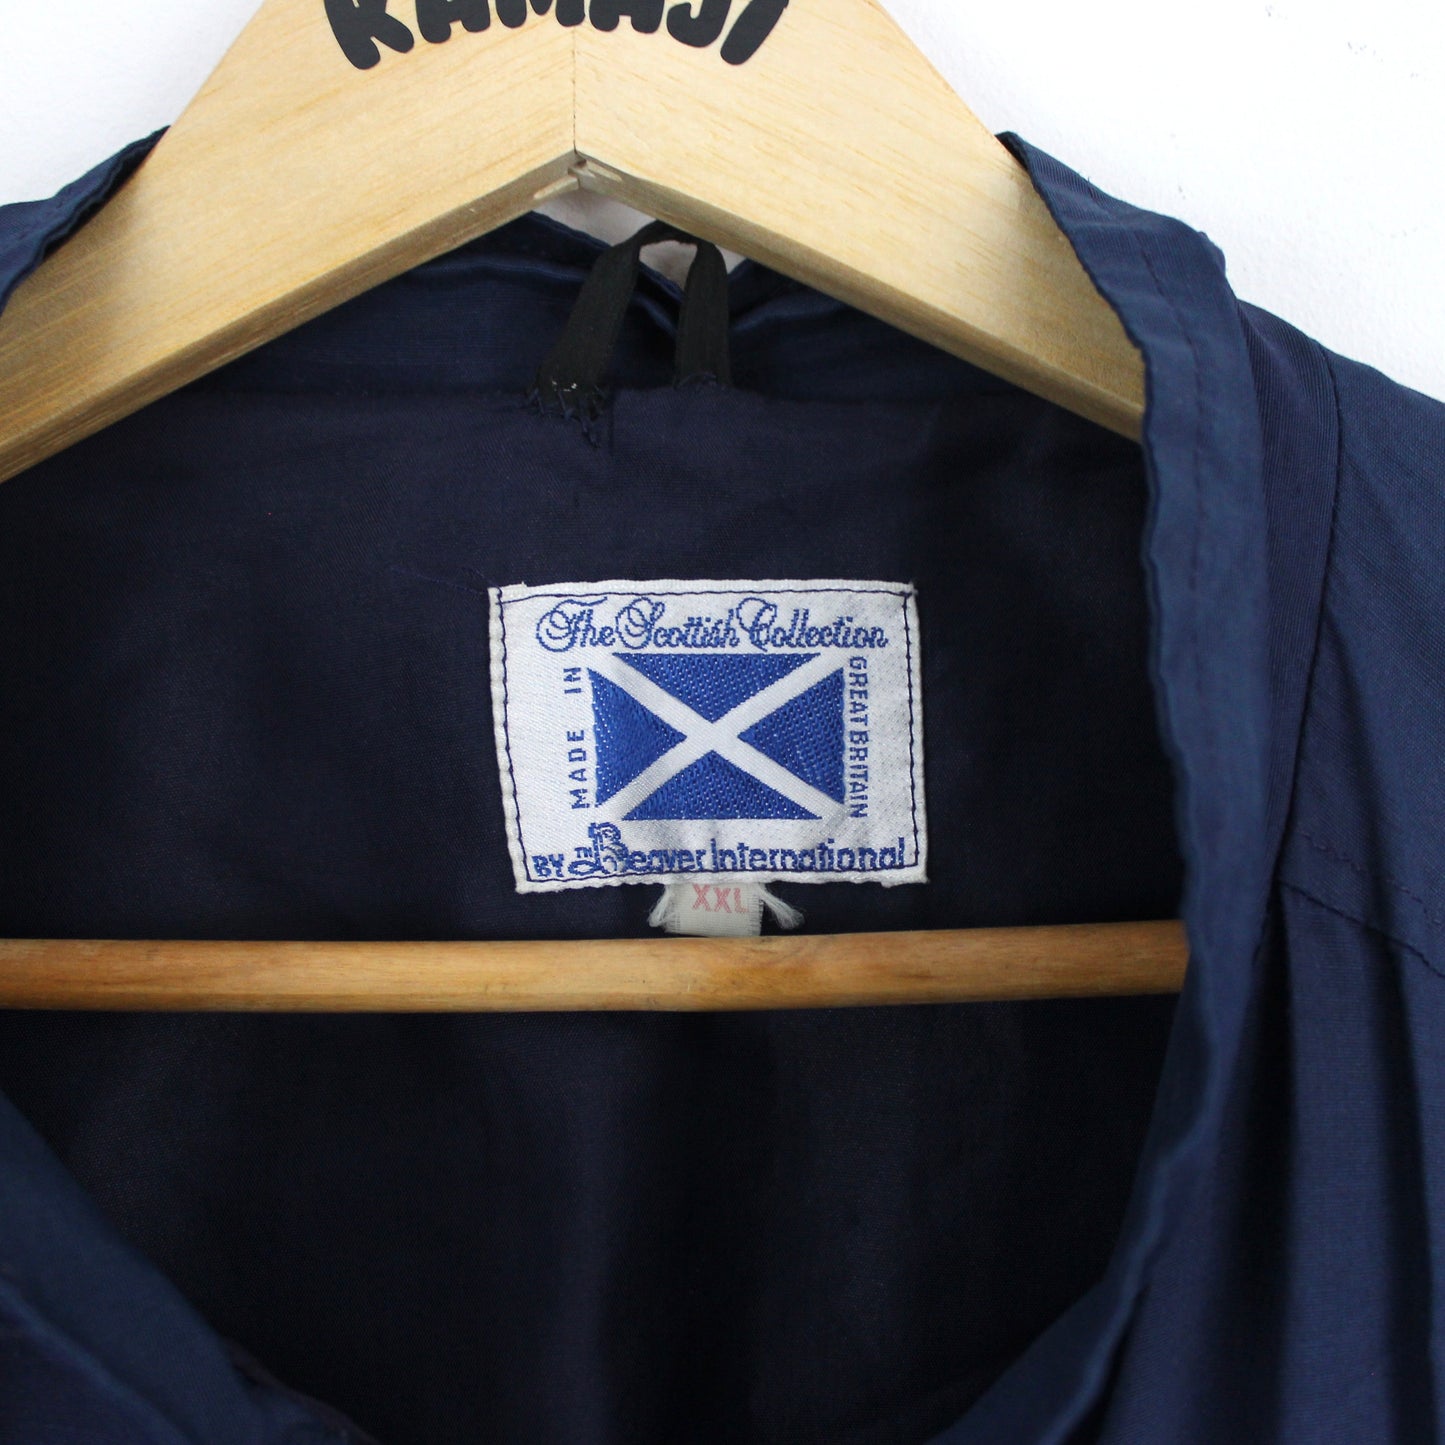 The Old Course St Andrews Vintage Golf Jacket, by Beaver International, Made in Britain (XXL)